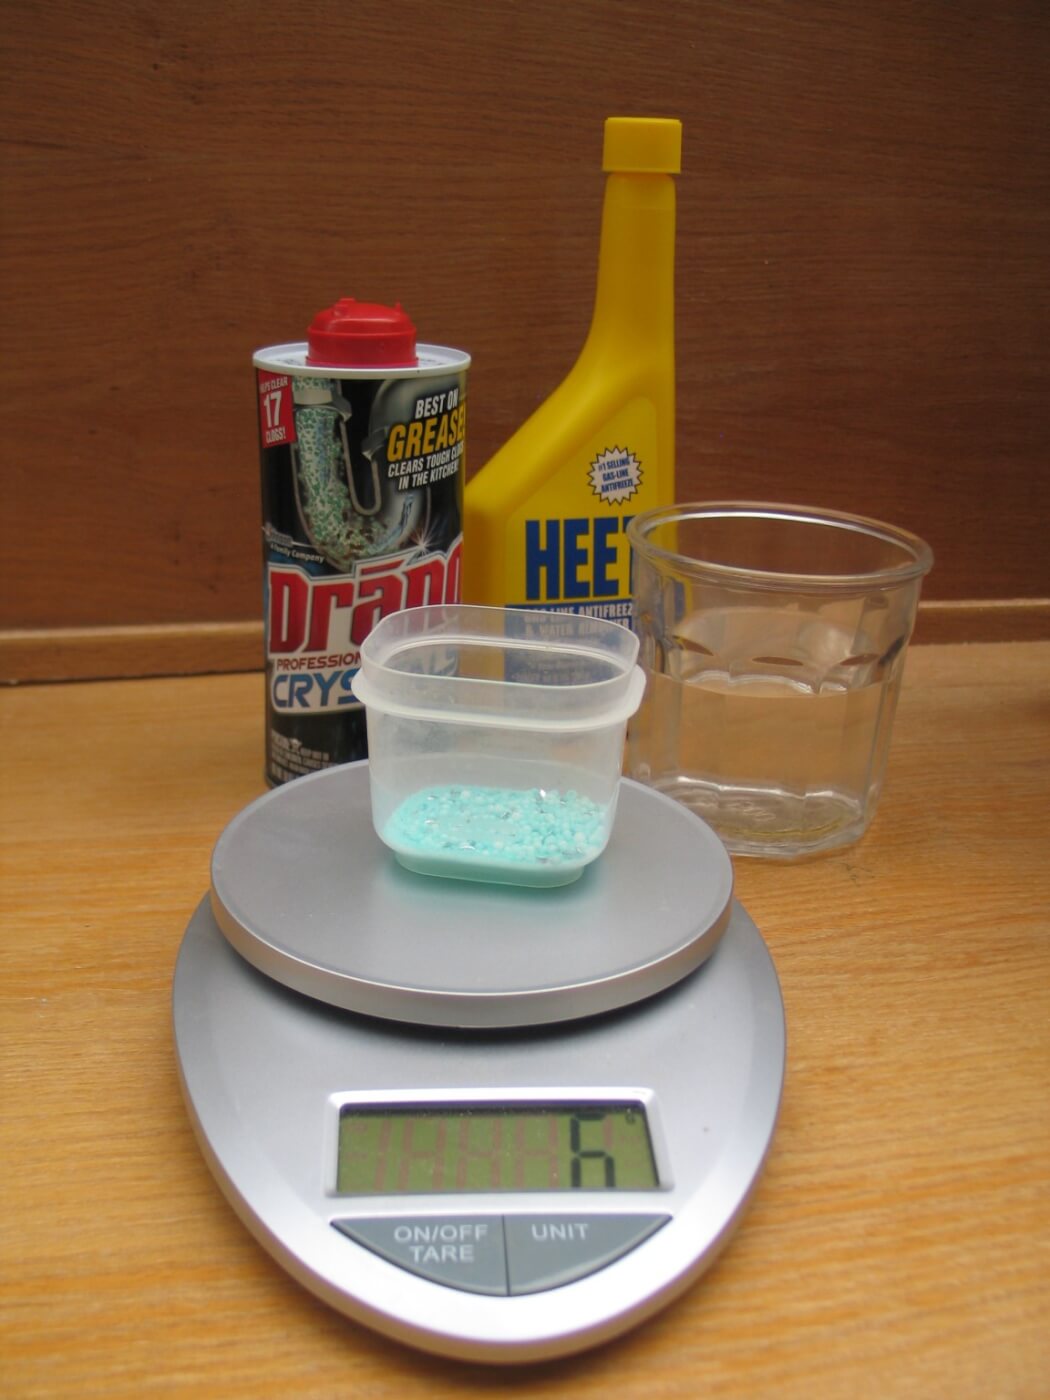 3. A digital scale that measures in grams and one that can tare weight is essential. Zero out the scale before measuring the sodium hydroxide (lye).